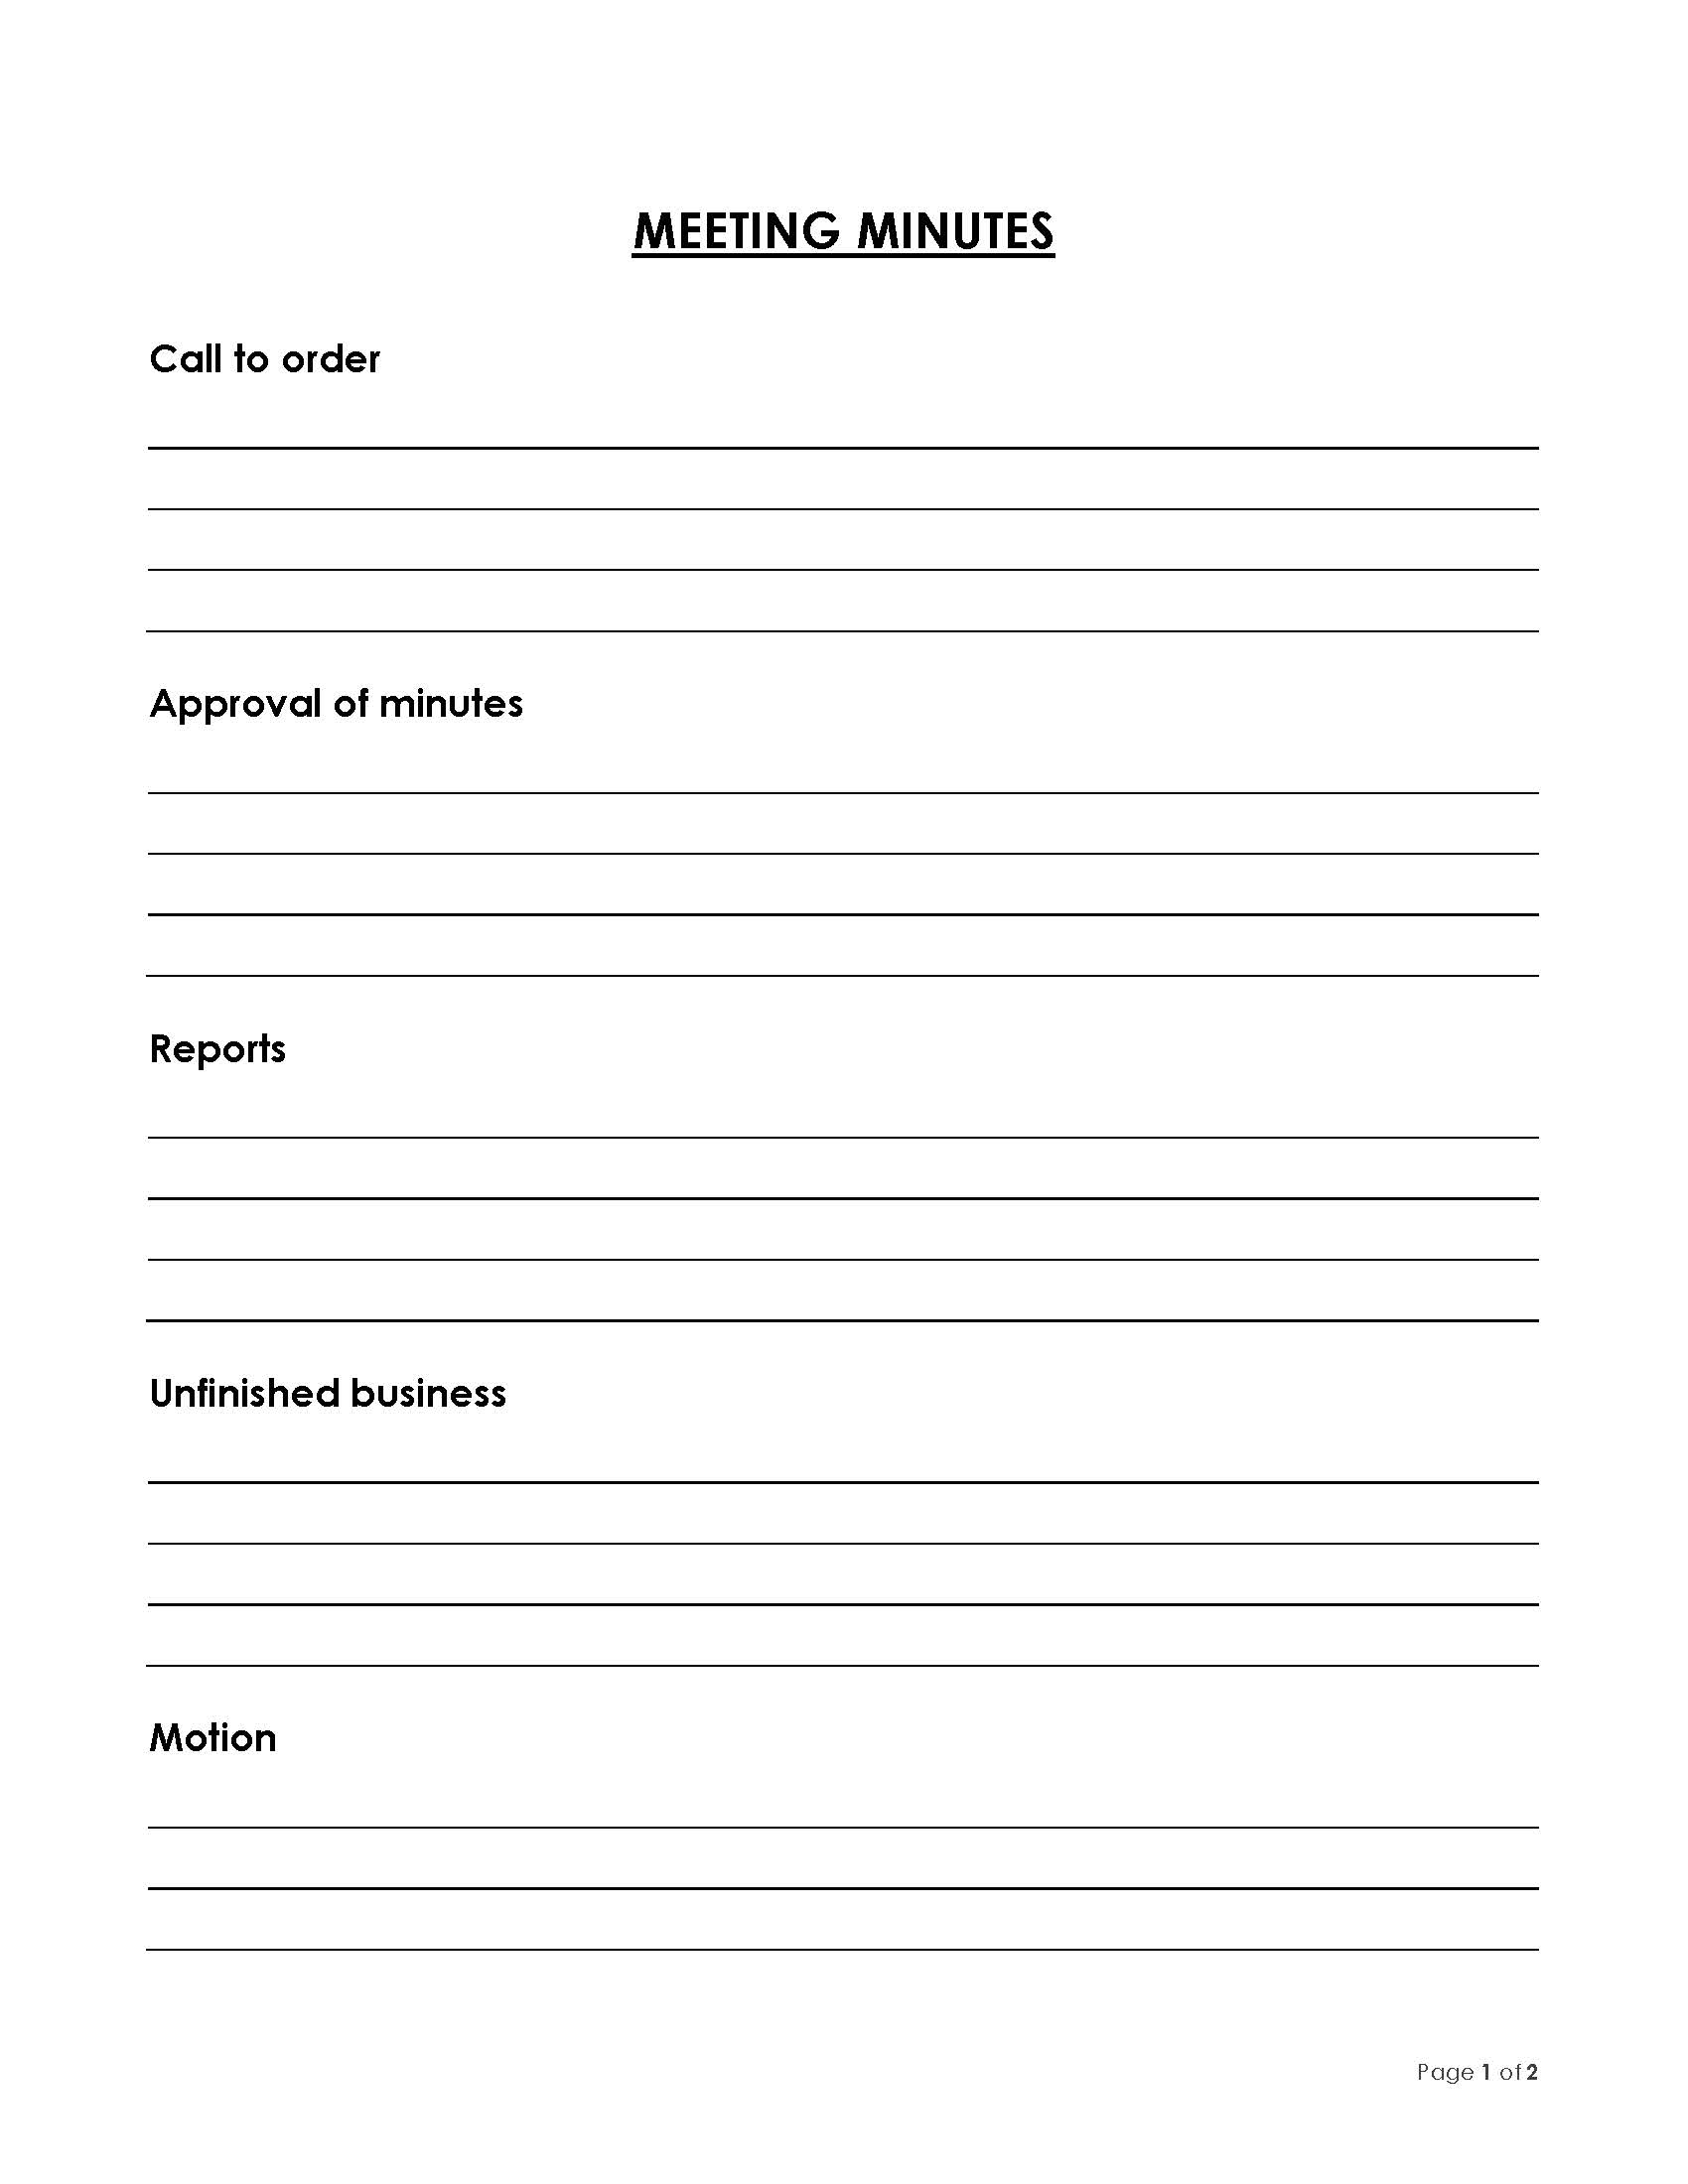 Professional Fillable Call to Order Meeting Minutes Template 02 for Word Document